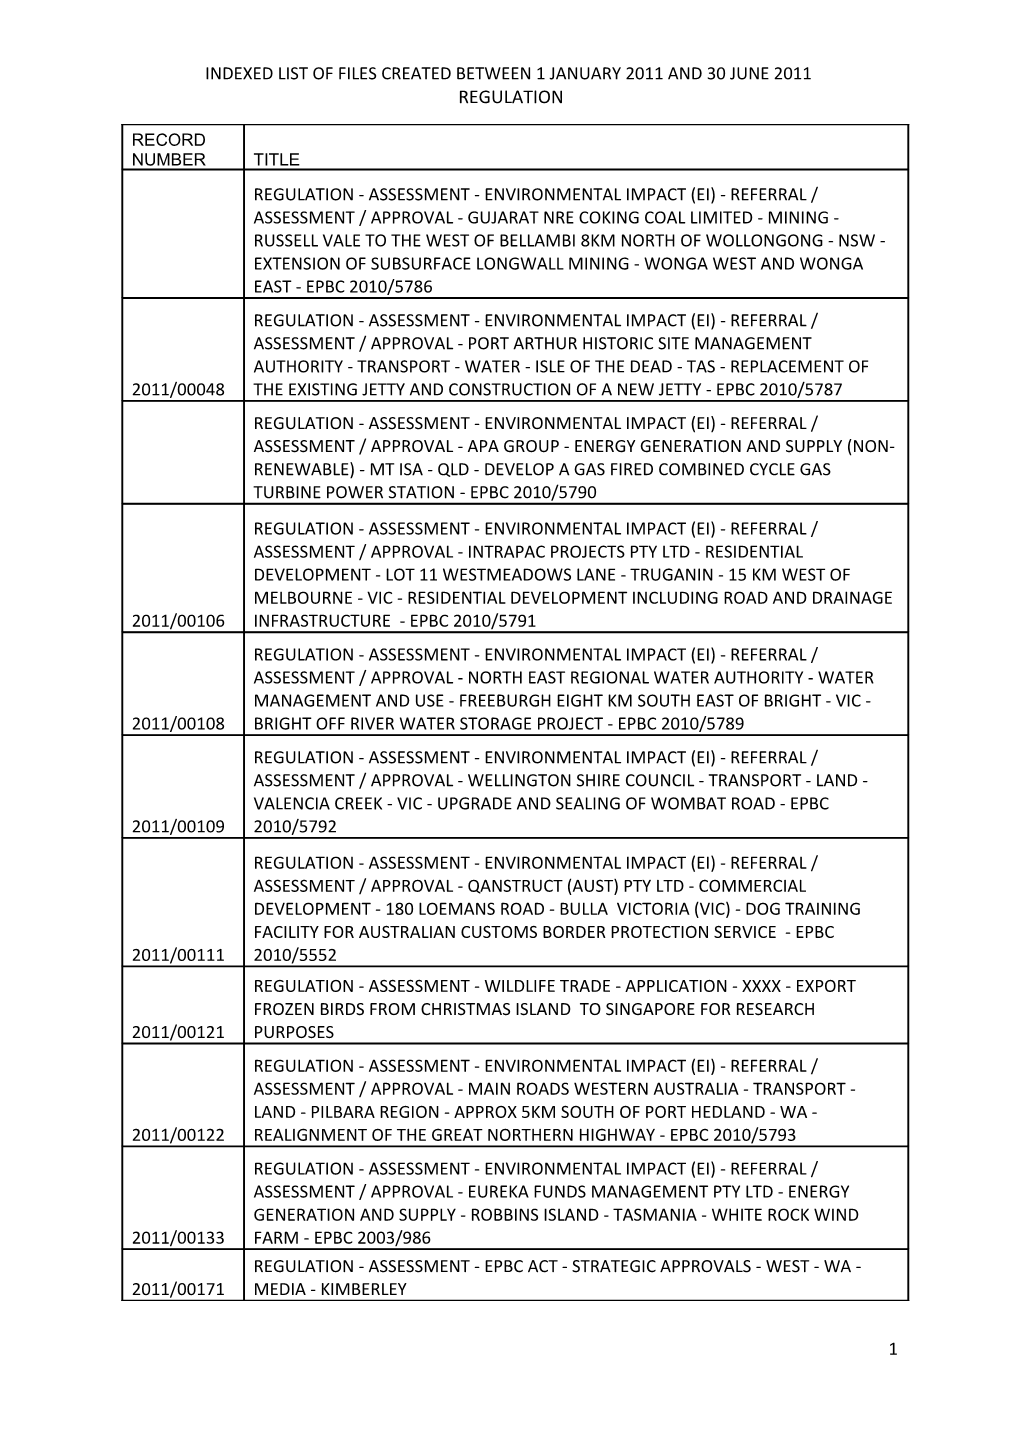 Indexed List of Files Created Between 1 January 2011 and 30 June 2011 - Regulation